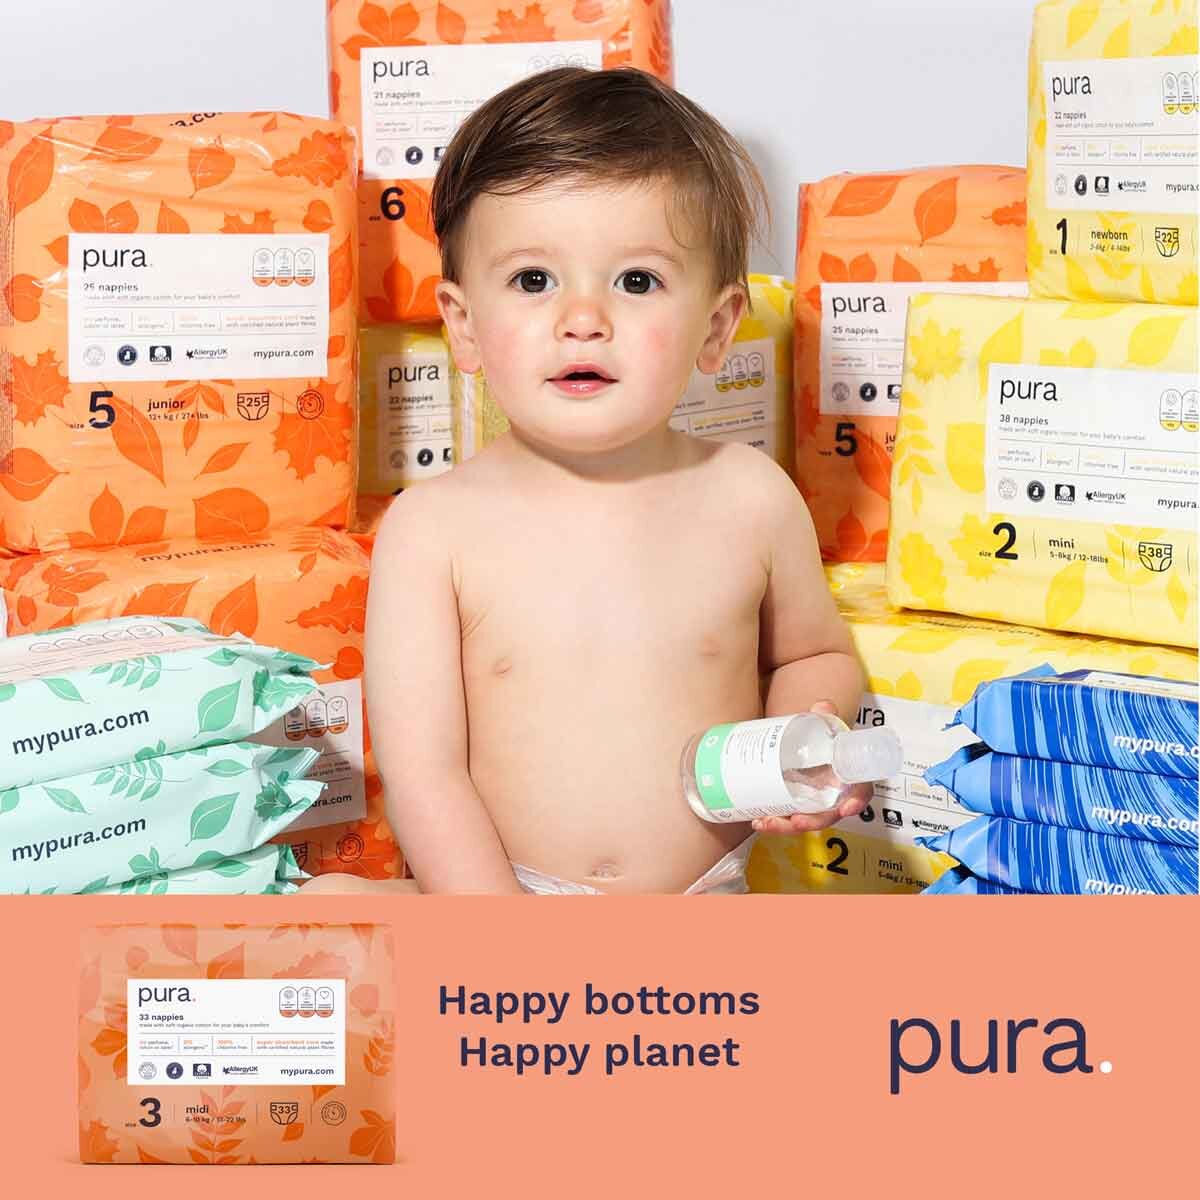 Baby Sitting With Pura Nappy Packs